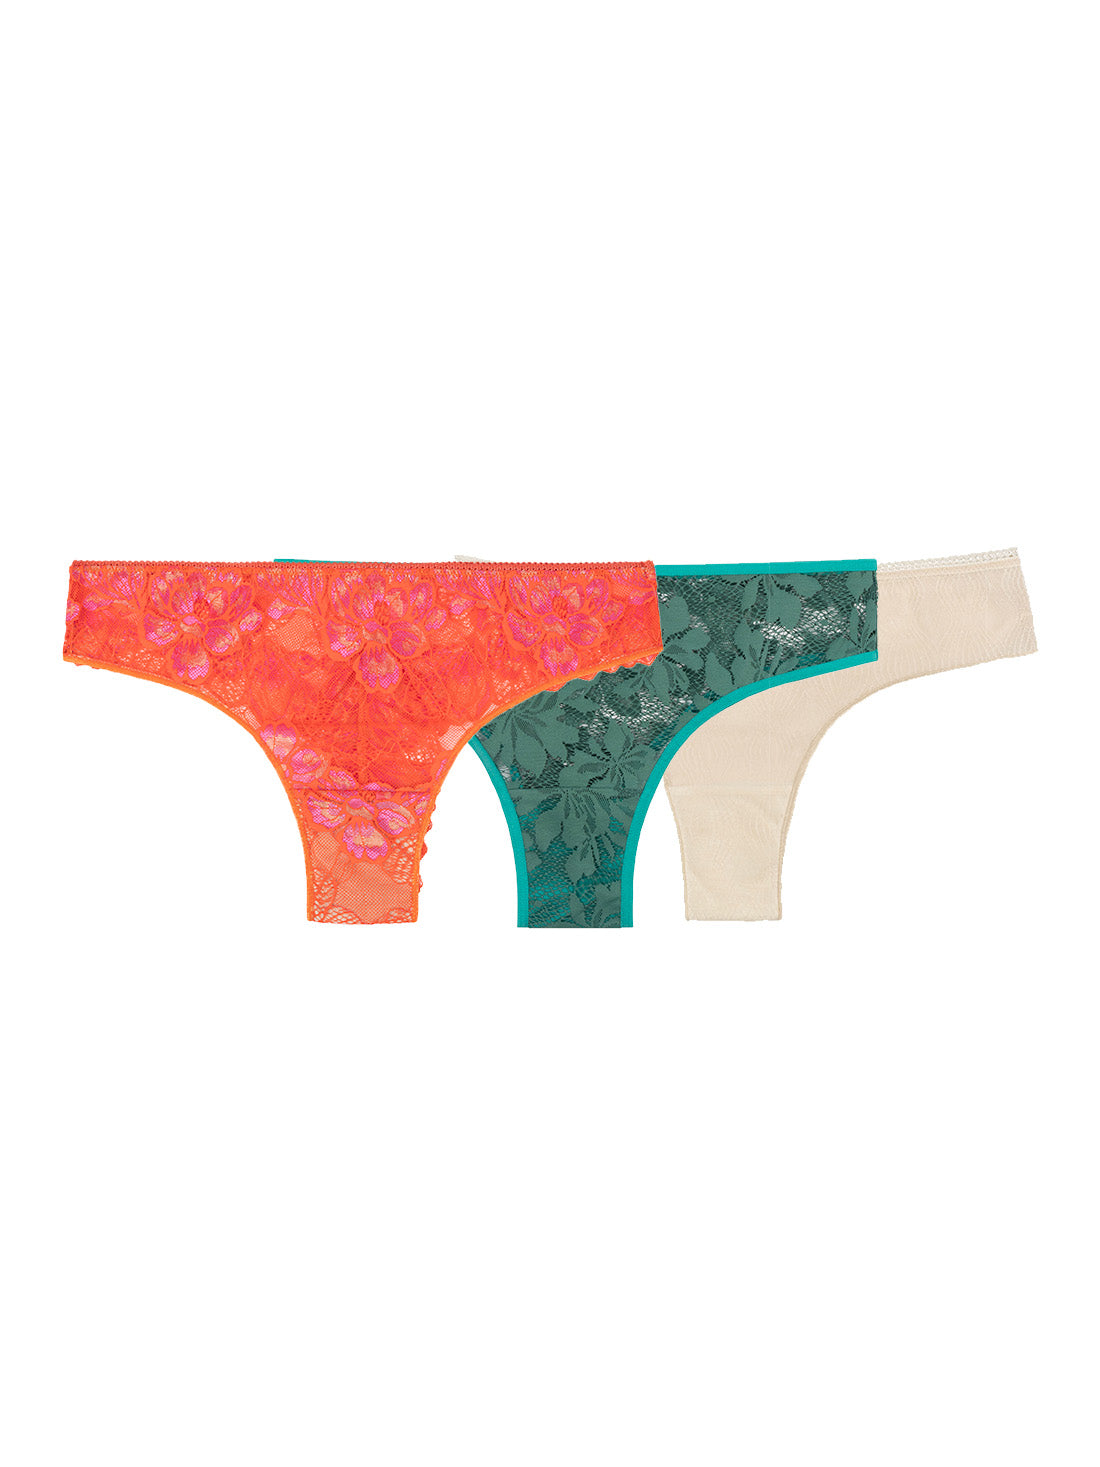 A bundle of 3 thongs: The Flora thong in Tangerine. The Elena Thong in Sage and The Esme Thong in Tapioca